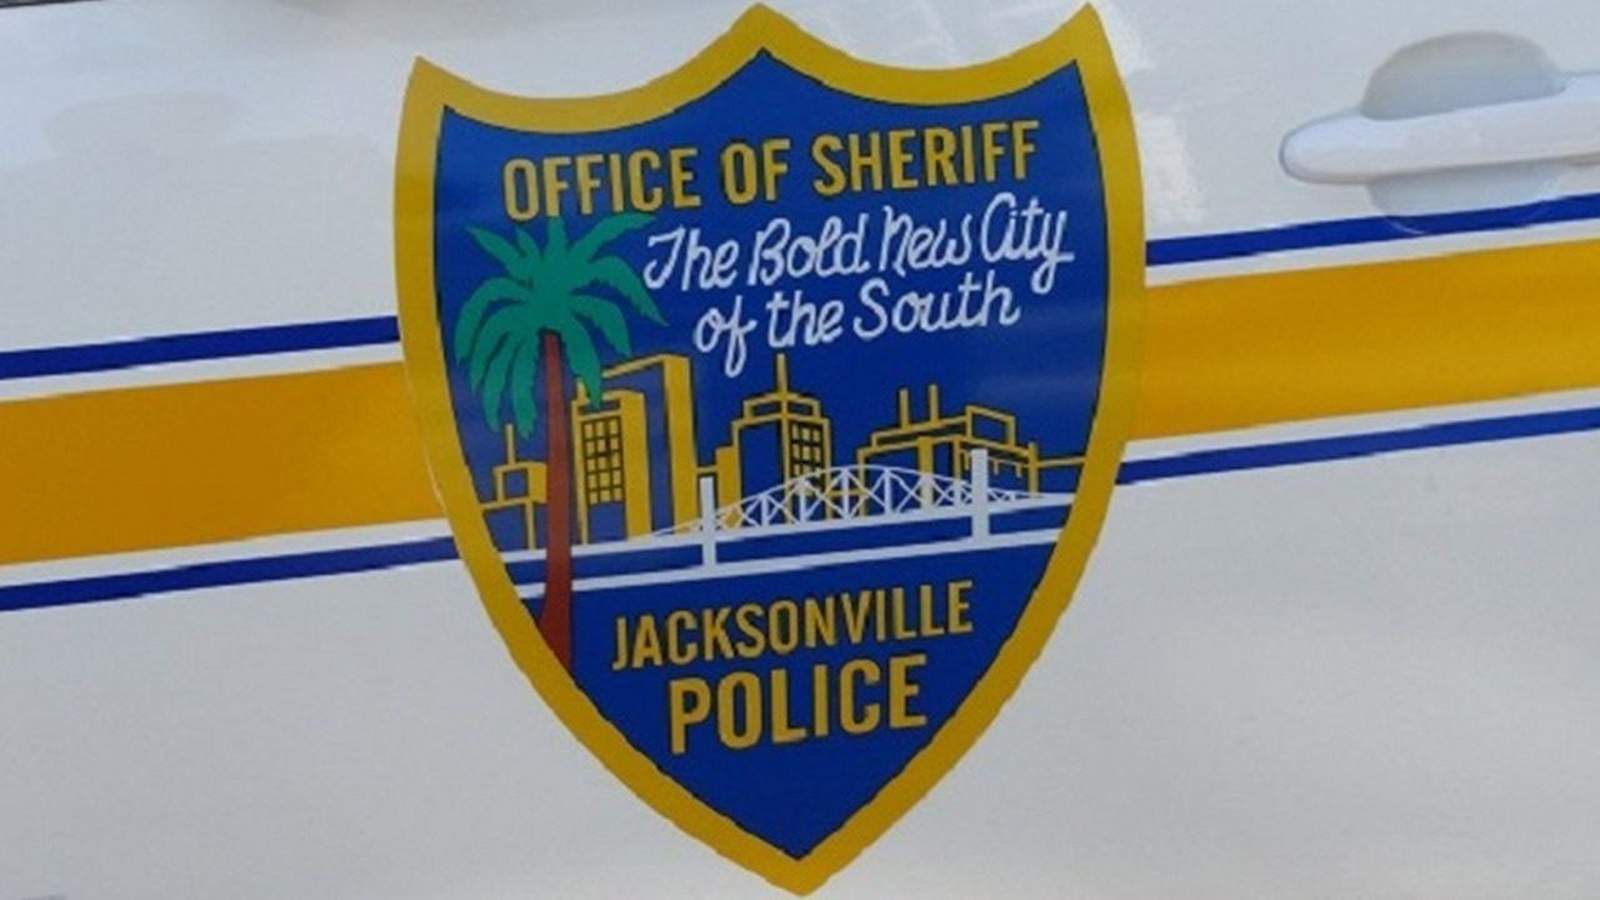 JSO officer who asked theft victim for explicit photos accused of bribery